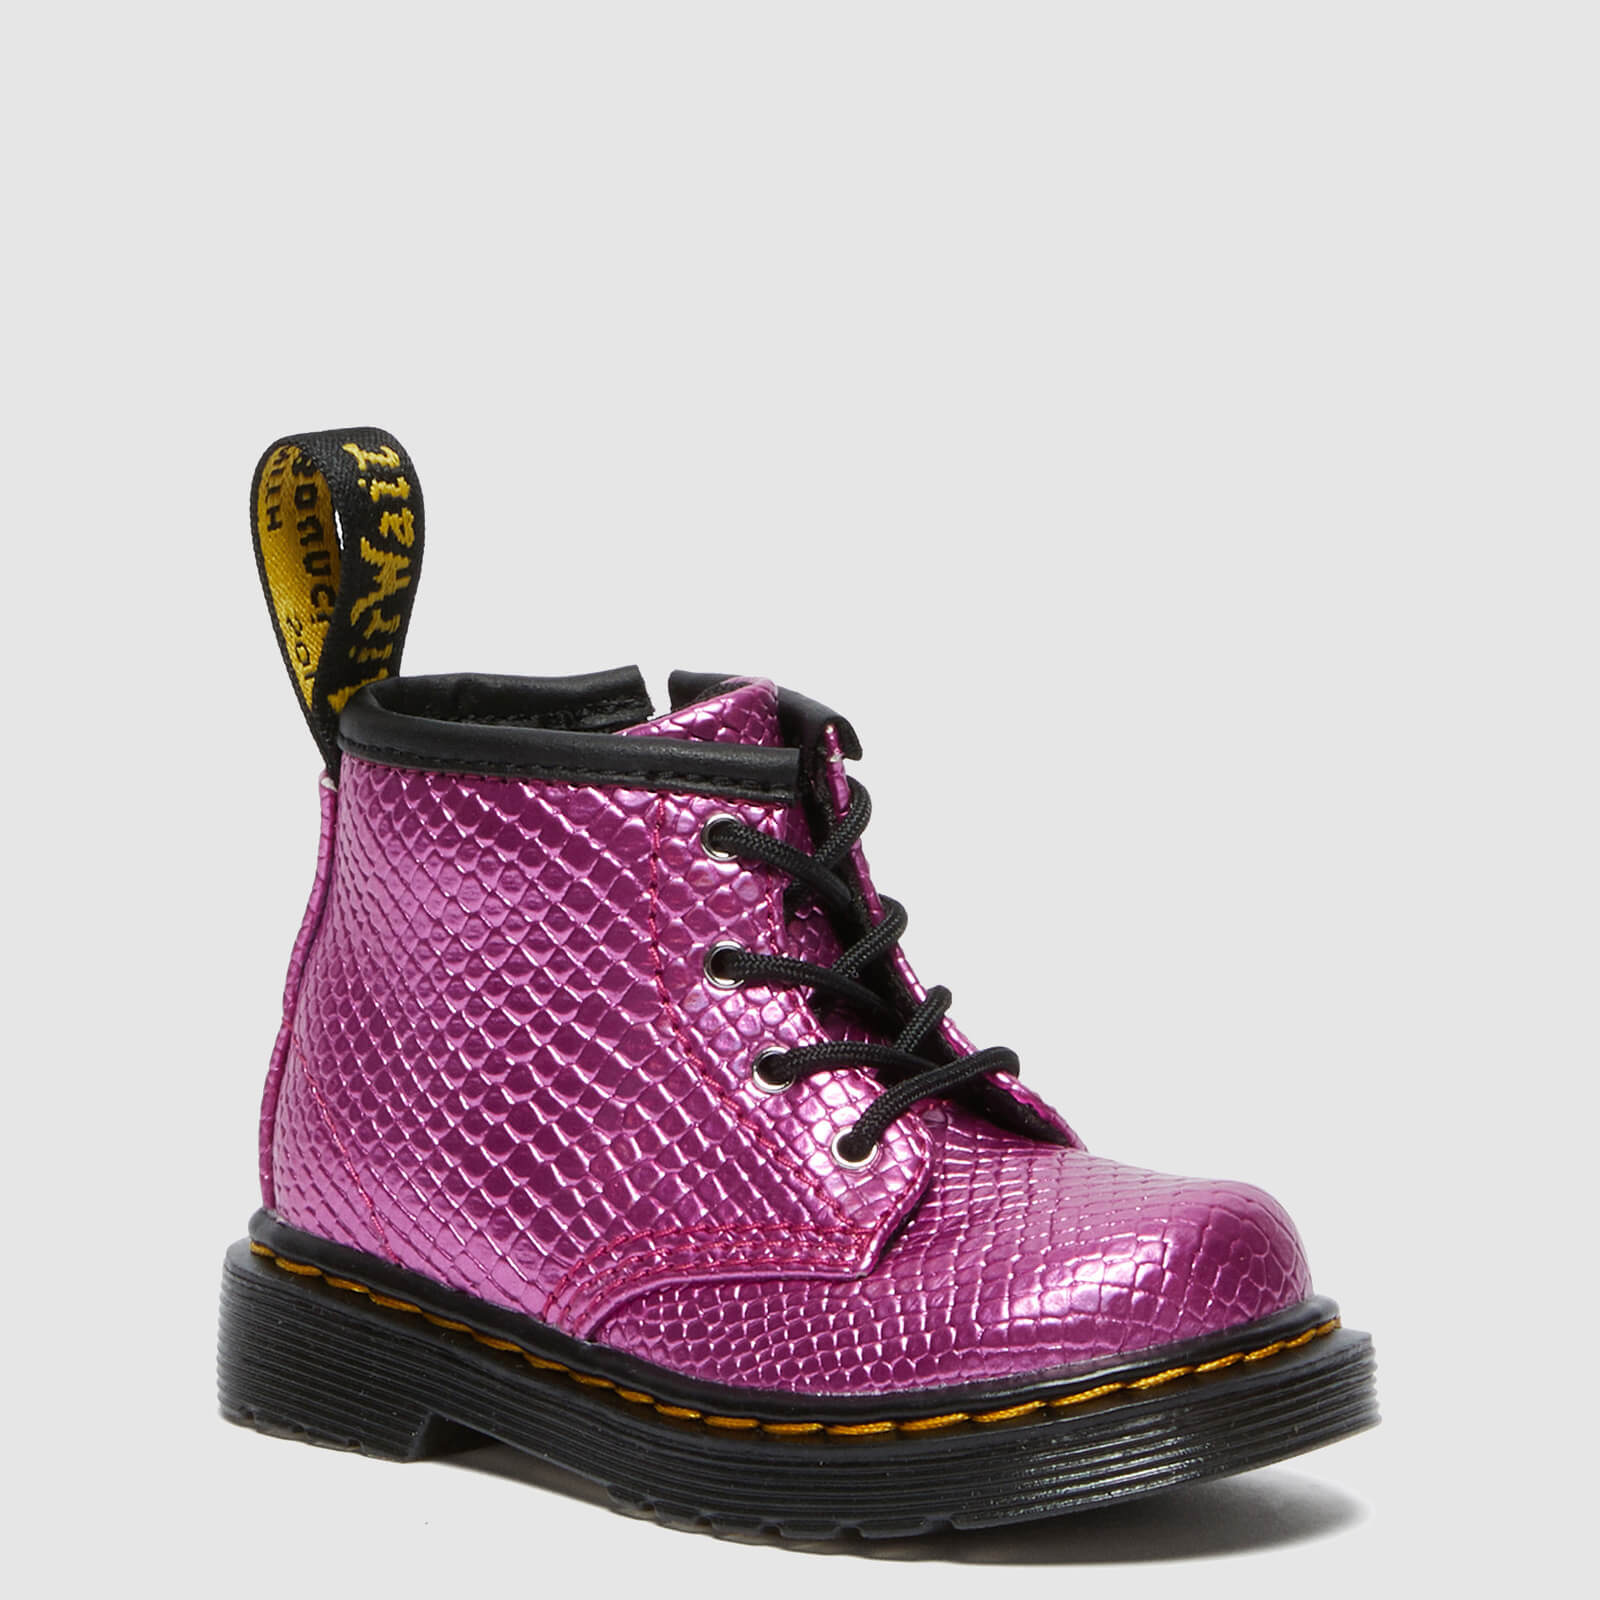 Dr. Martens Babies' 1460 Patent Lamper Lace Up Boots - Pink Reptile Emboss - UK 3 Baby